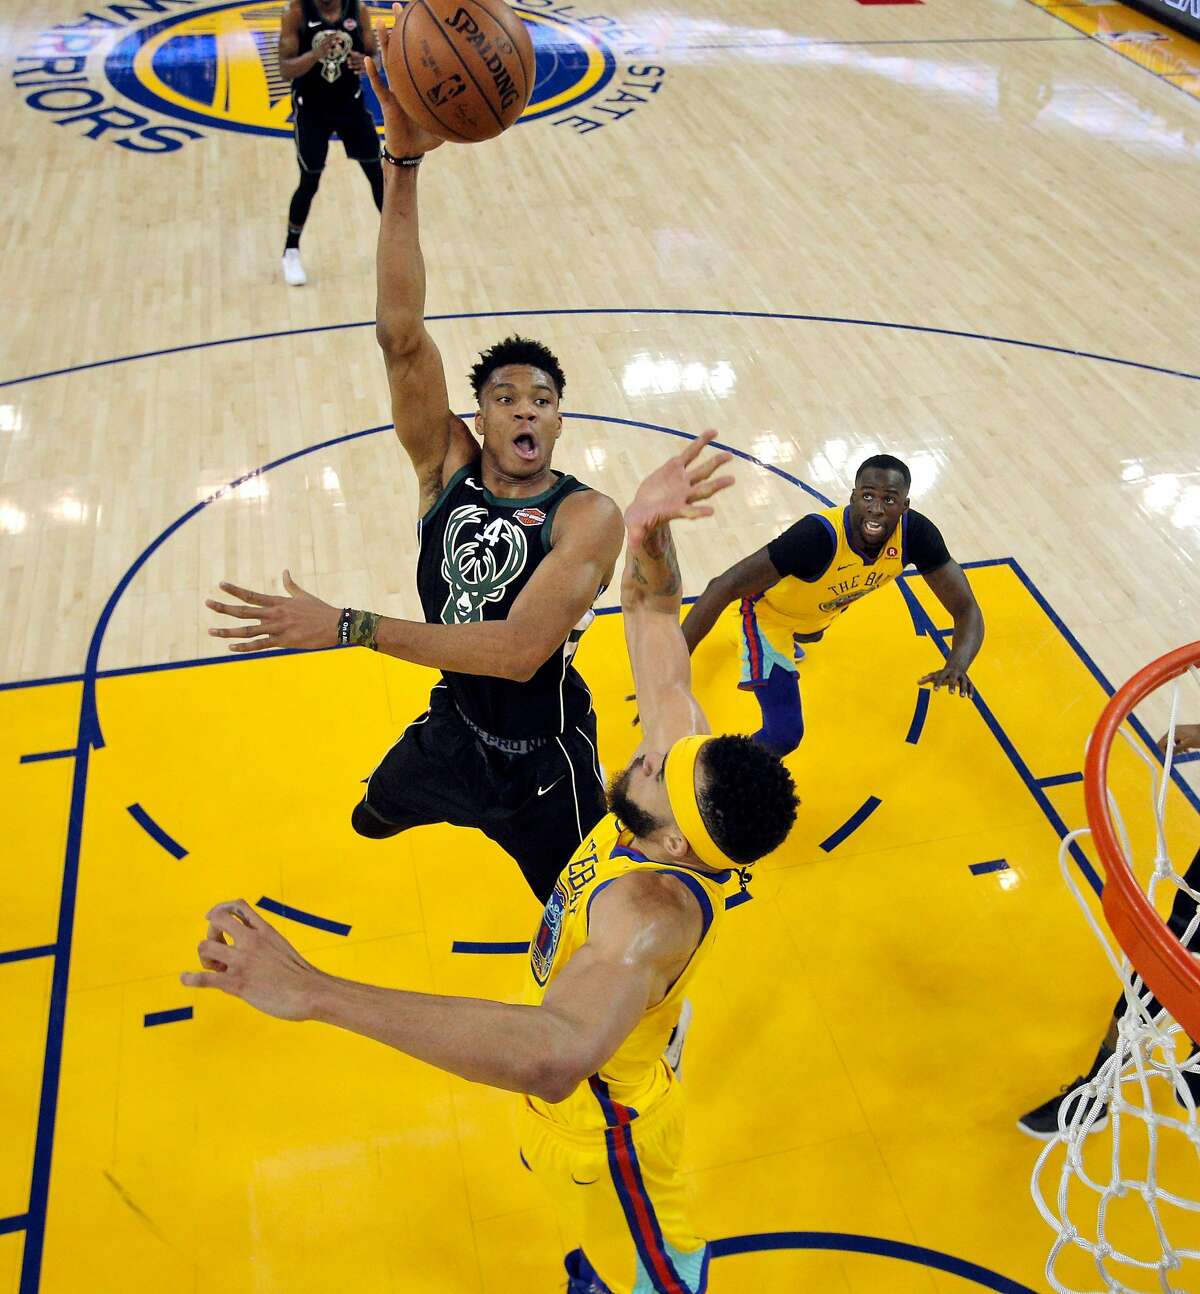 Giannis Antetokounmpo (34) puts up a shot over JaVale McGee (1) in the first half as the Golden State Warriors played the Milwaukee Bucks at Oracle Arena in Oakland, Calif., on Thursday, March 29, 2018.